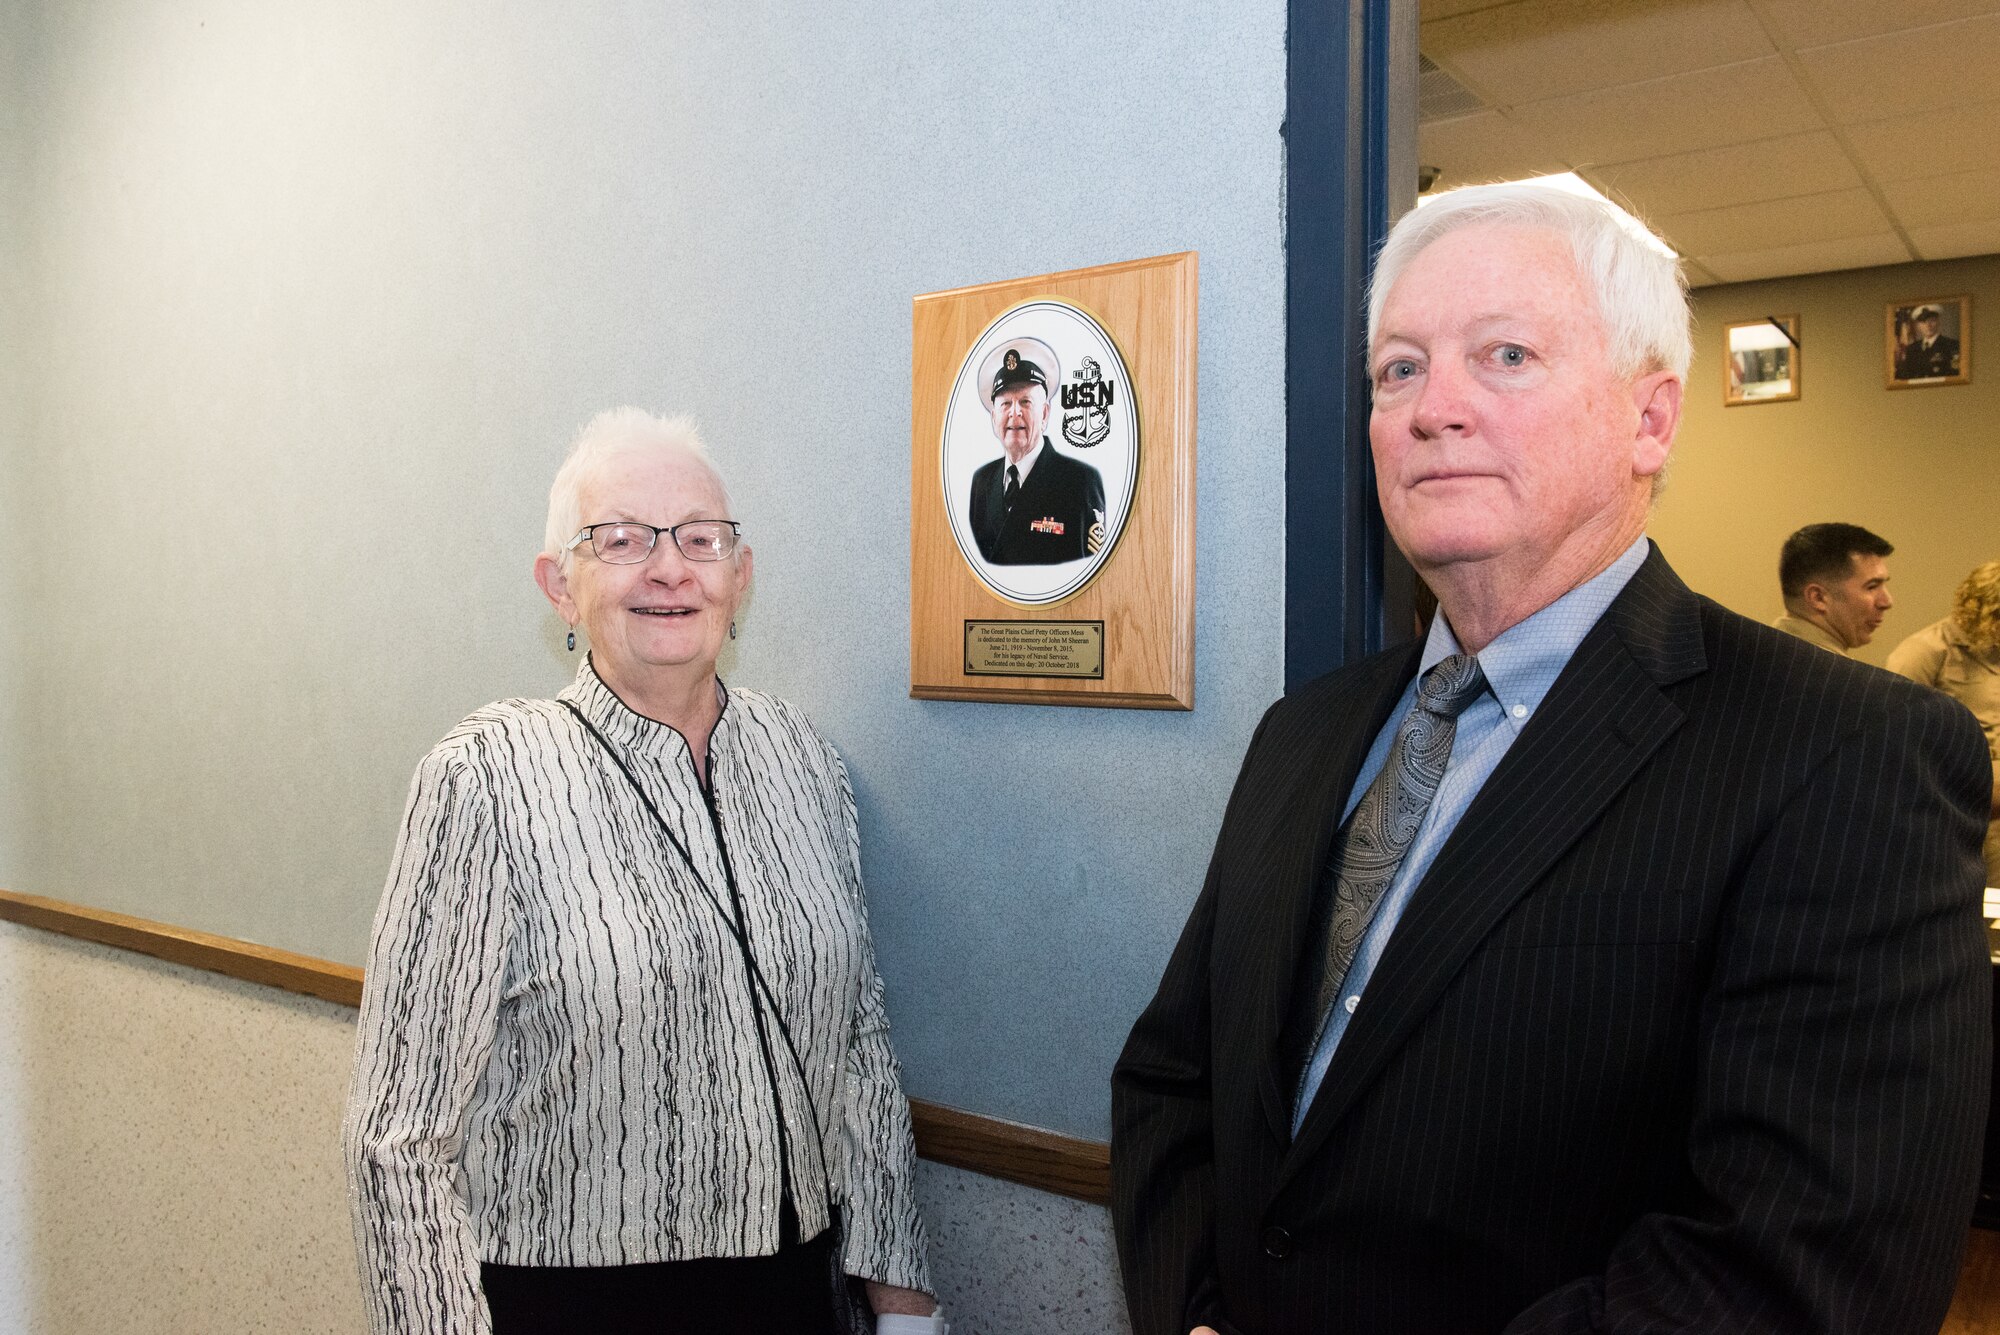 Linda Sheeran, wife of U.S. Navy veteran and retired Chief Petty Officer John Sheeran, and his son, John, pose in front of the plaque outside the Great Plains Chief Petty Officer Association Chief’s Mess that names the room after John following a ceremony at the 55th Operations Support Squadron Oct. 20, 2018.